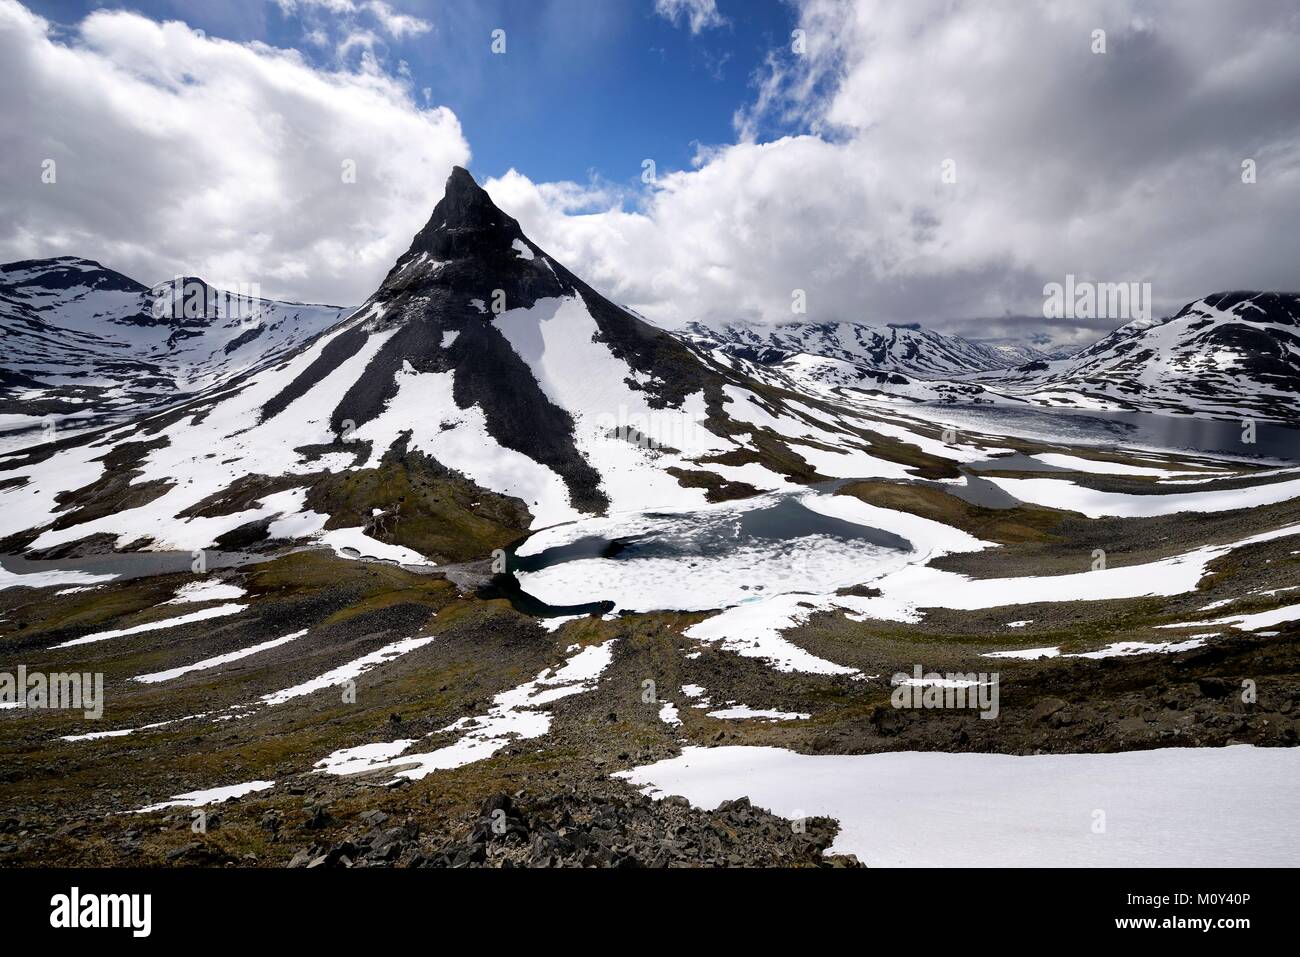 Norway,Oppland,Vaga,Jotunheimen National Park,Kyrkja (2032m),one of the most iconic mountain in Norway Stock Photo